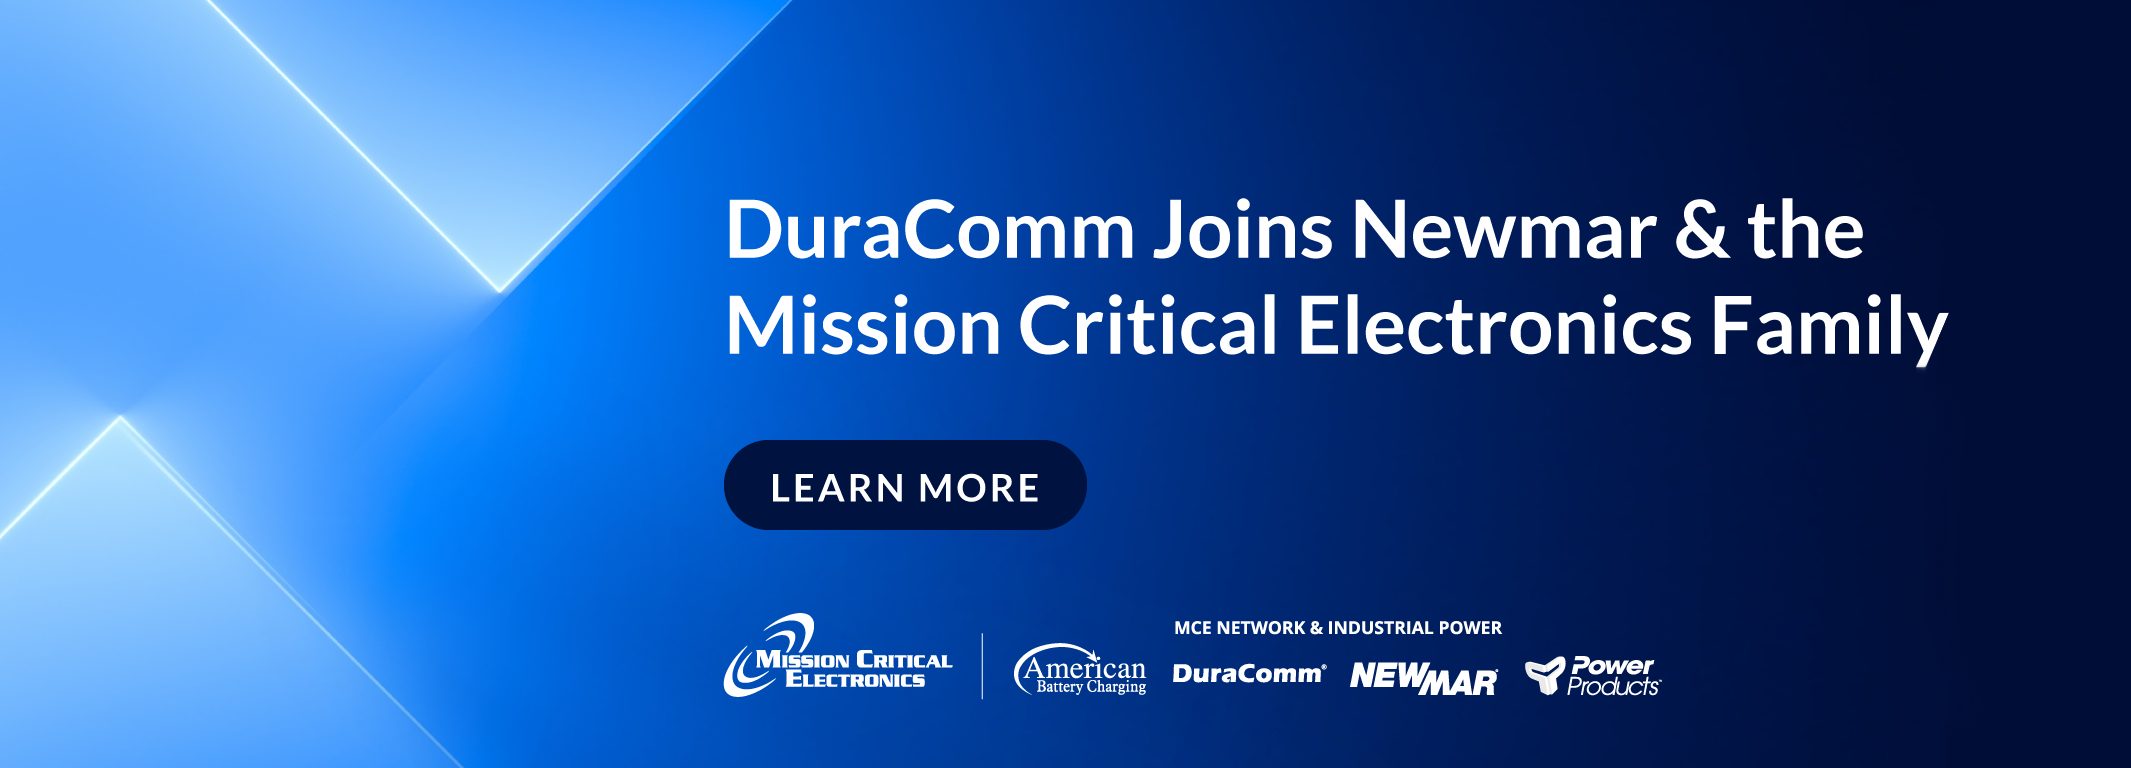 DuraComm Joins Newmar